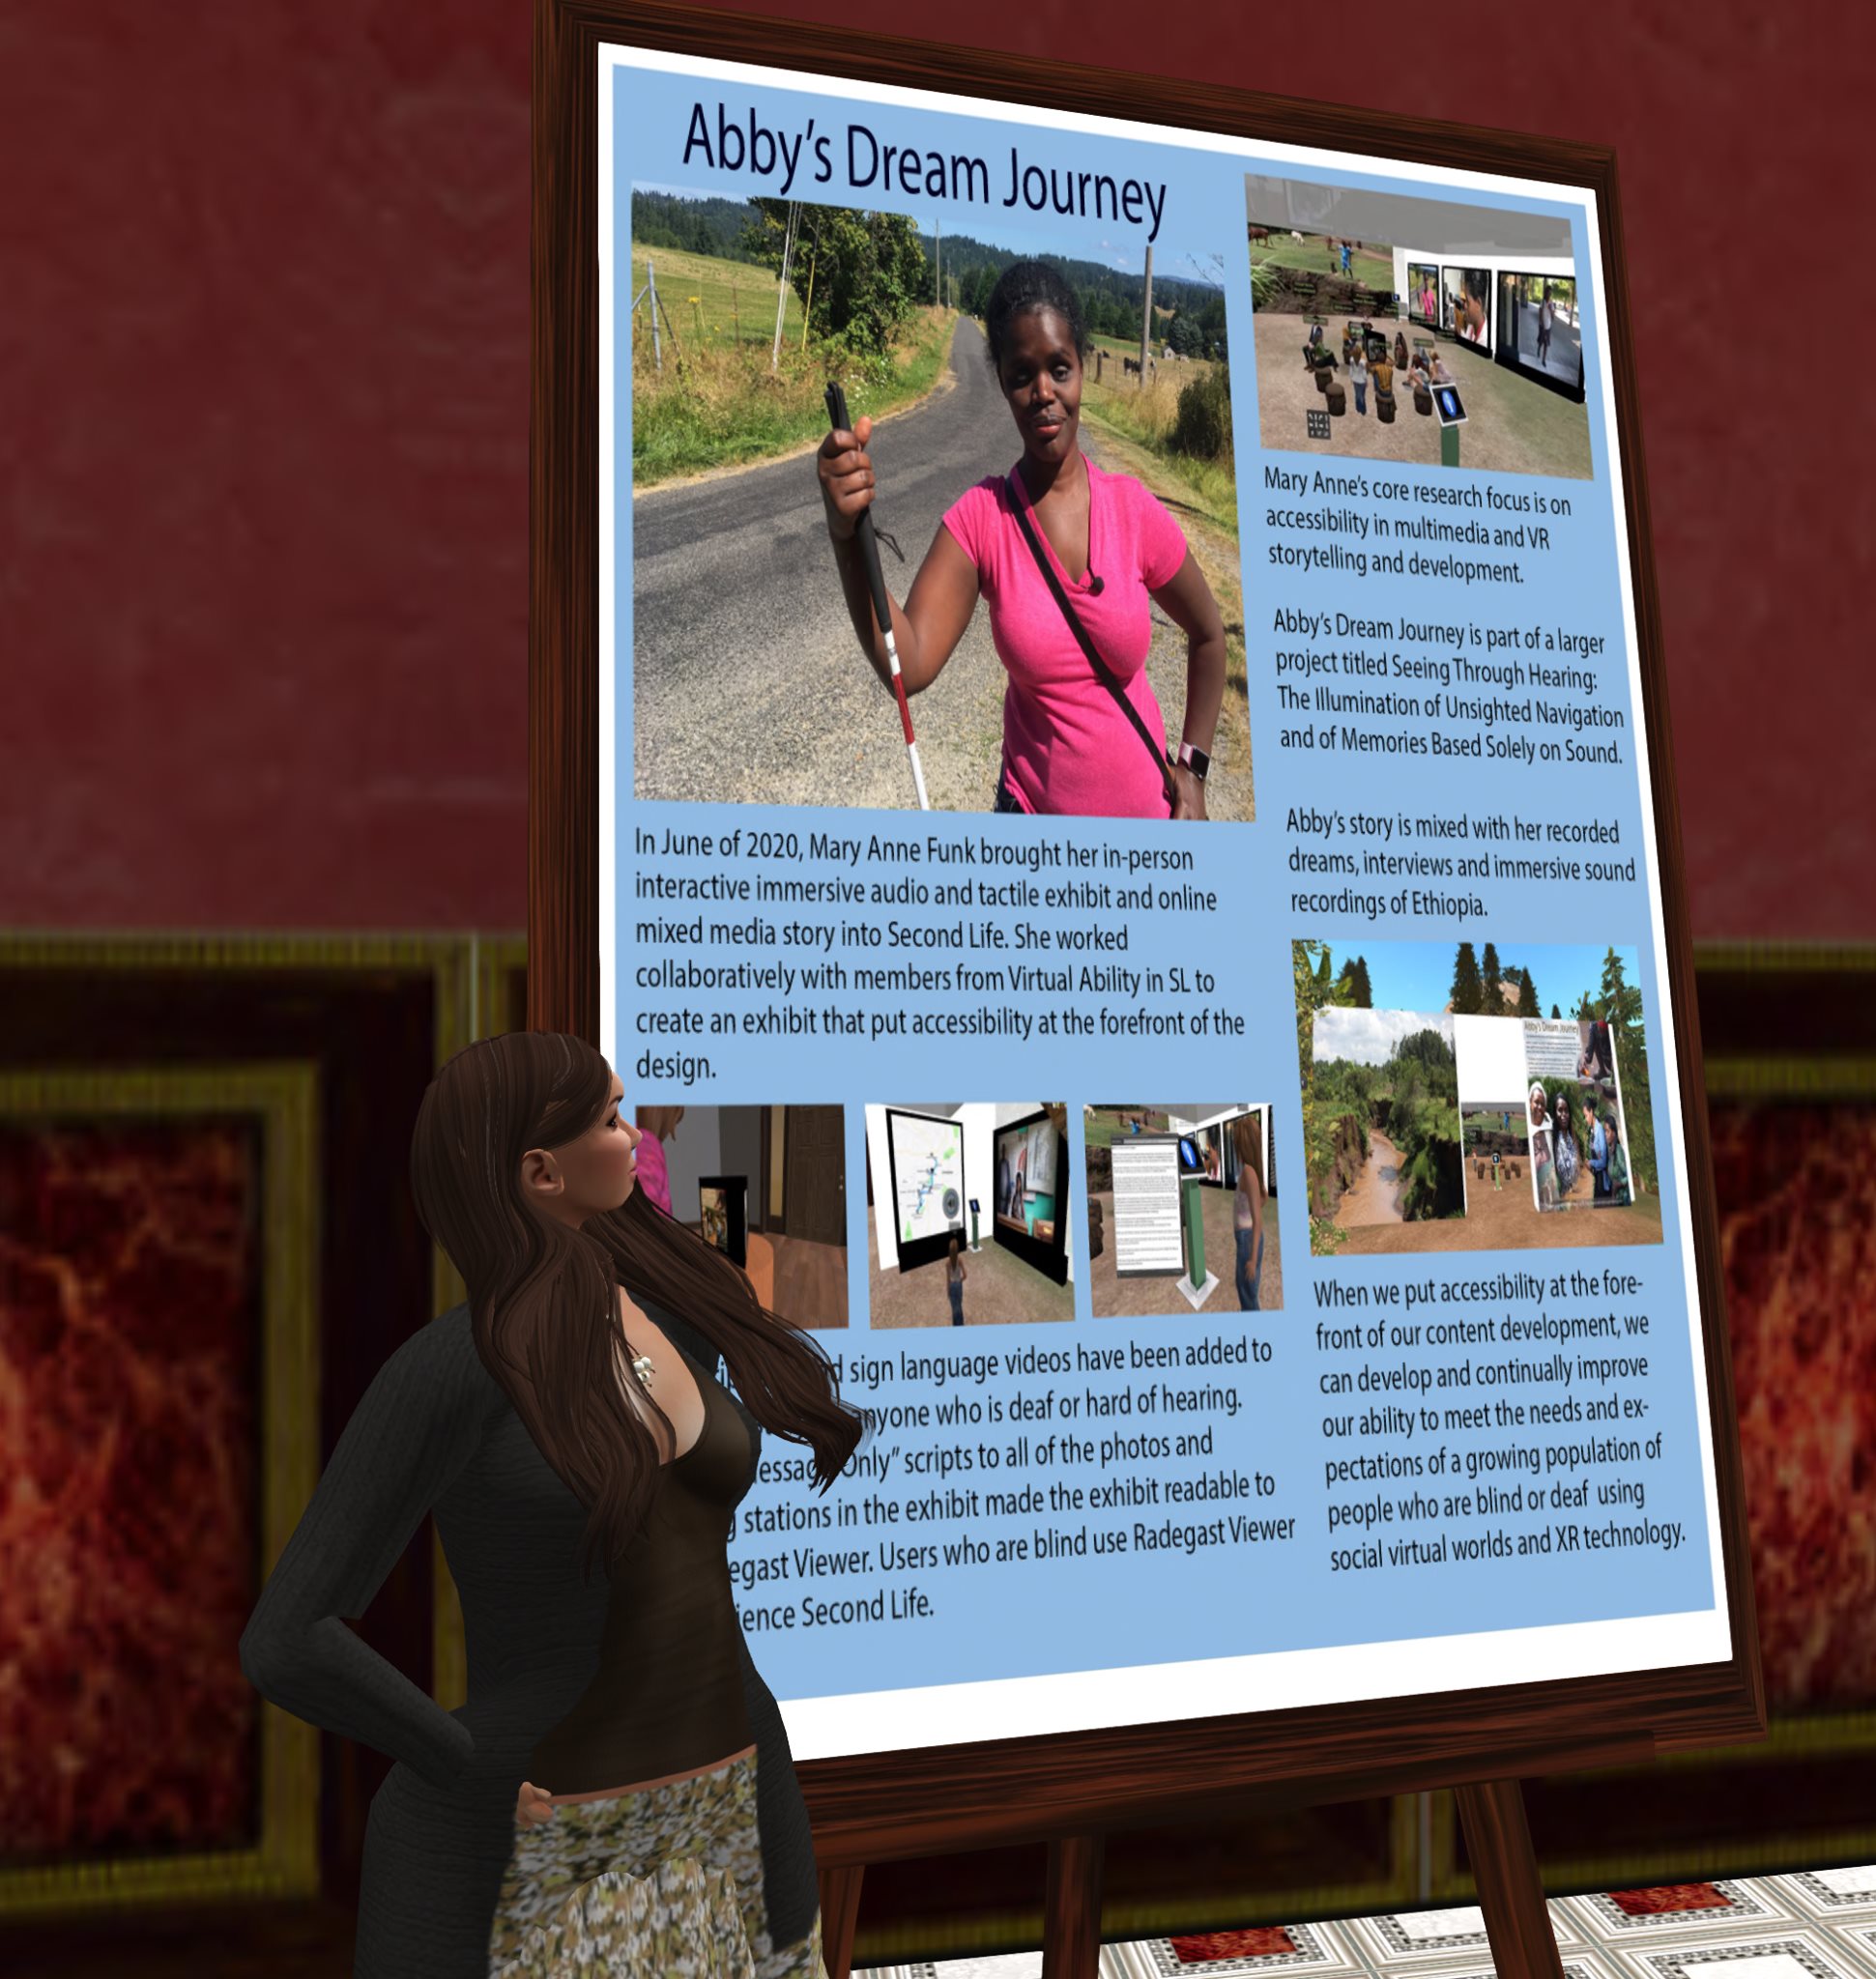 Mary Anne Funk as an avatar in Second Life showing her research poster during a presentation.